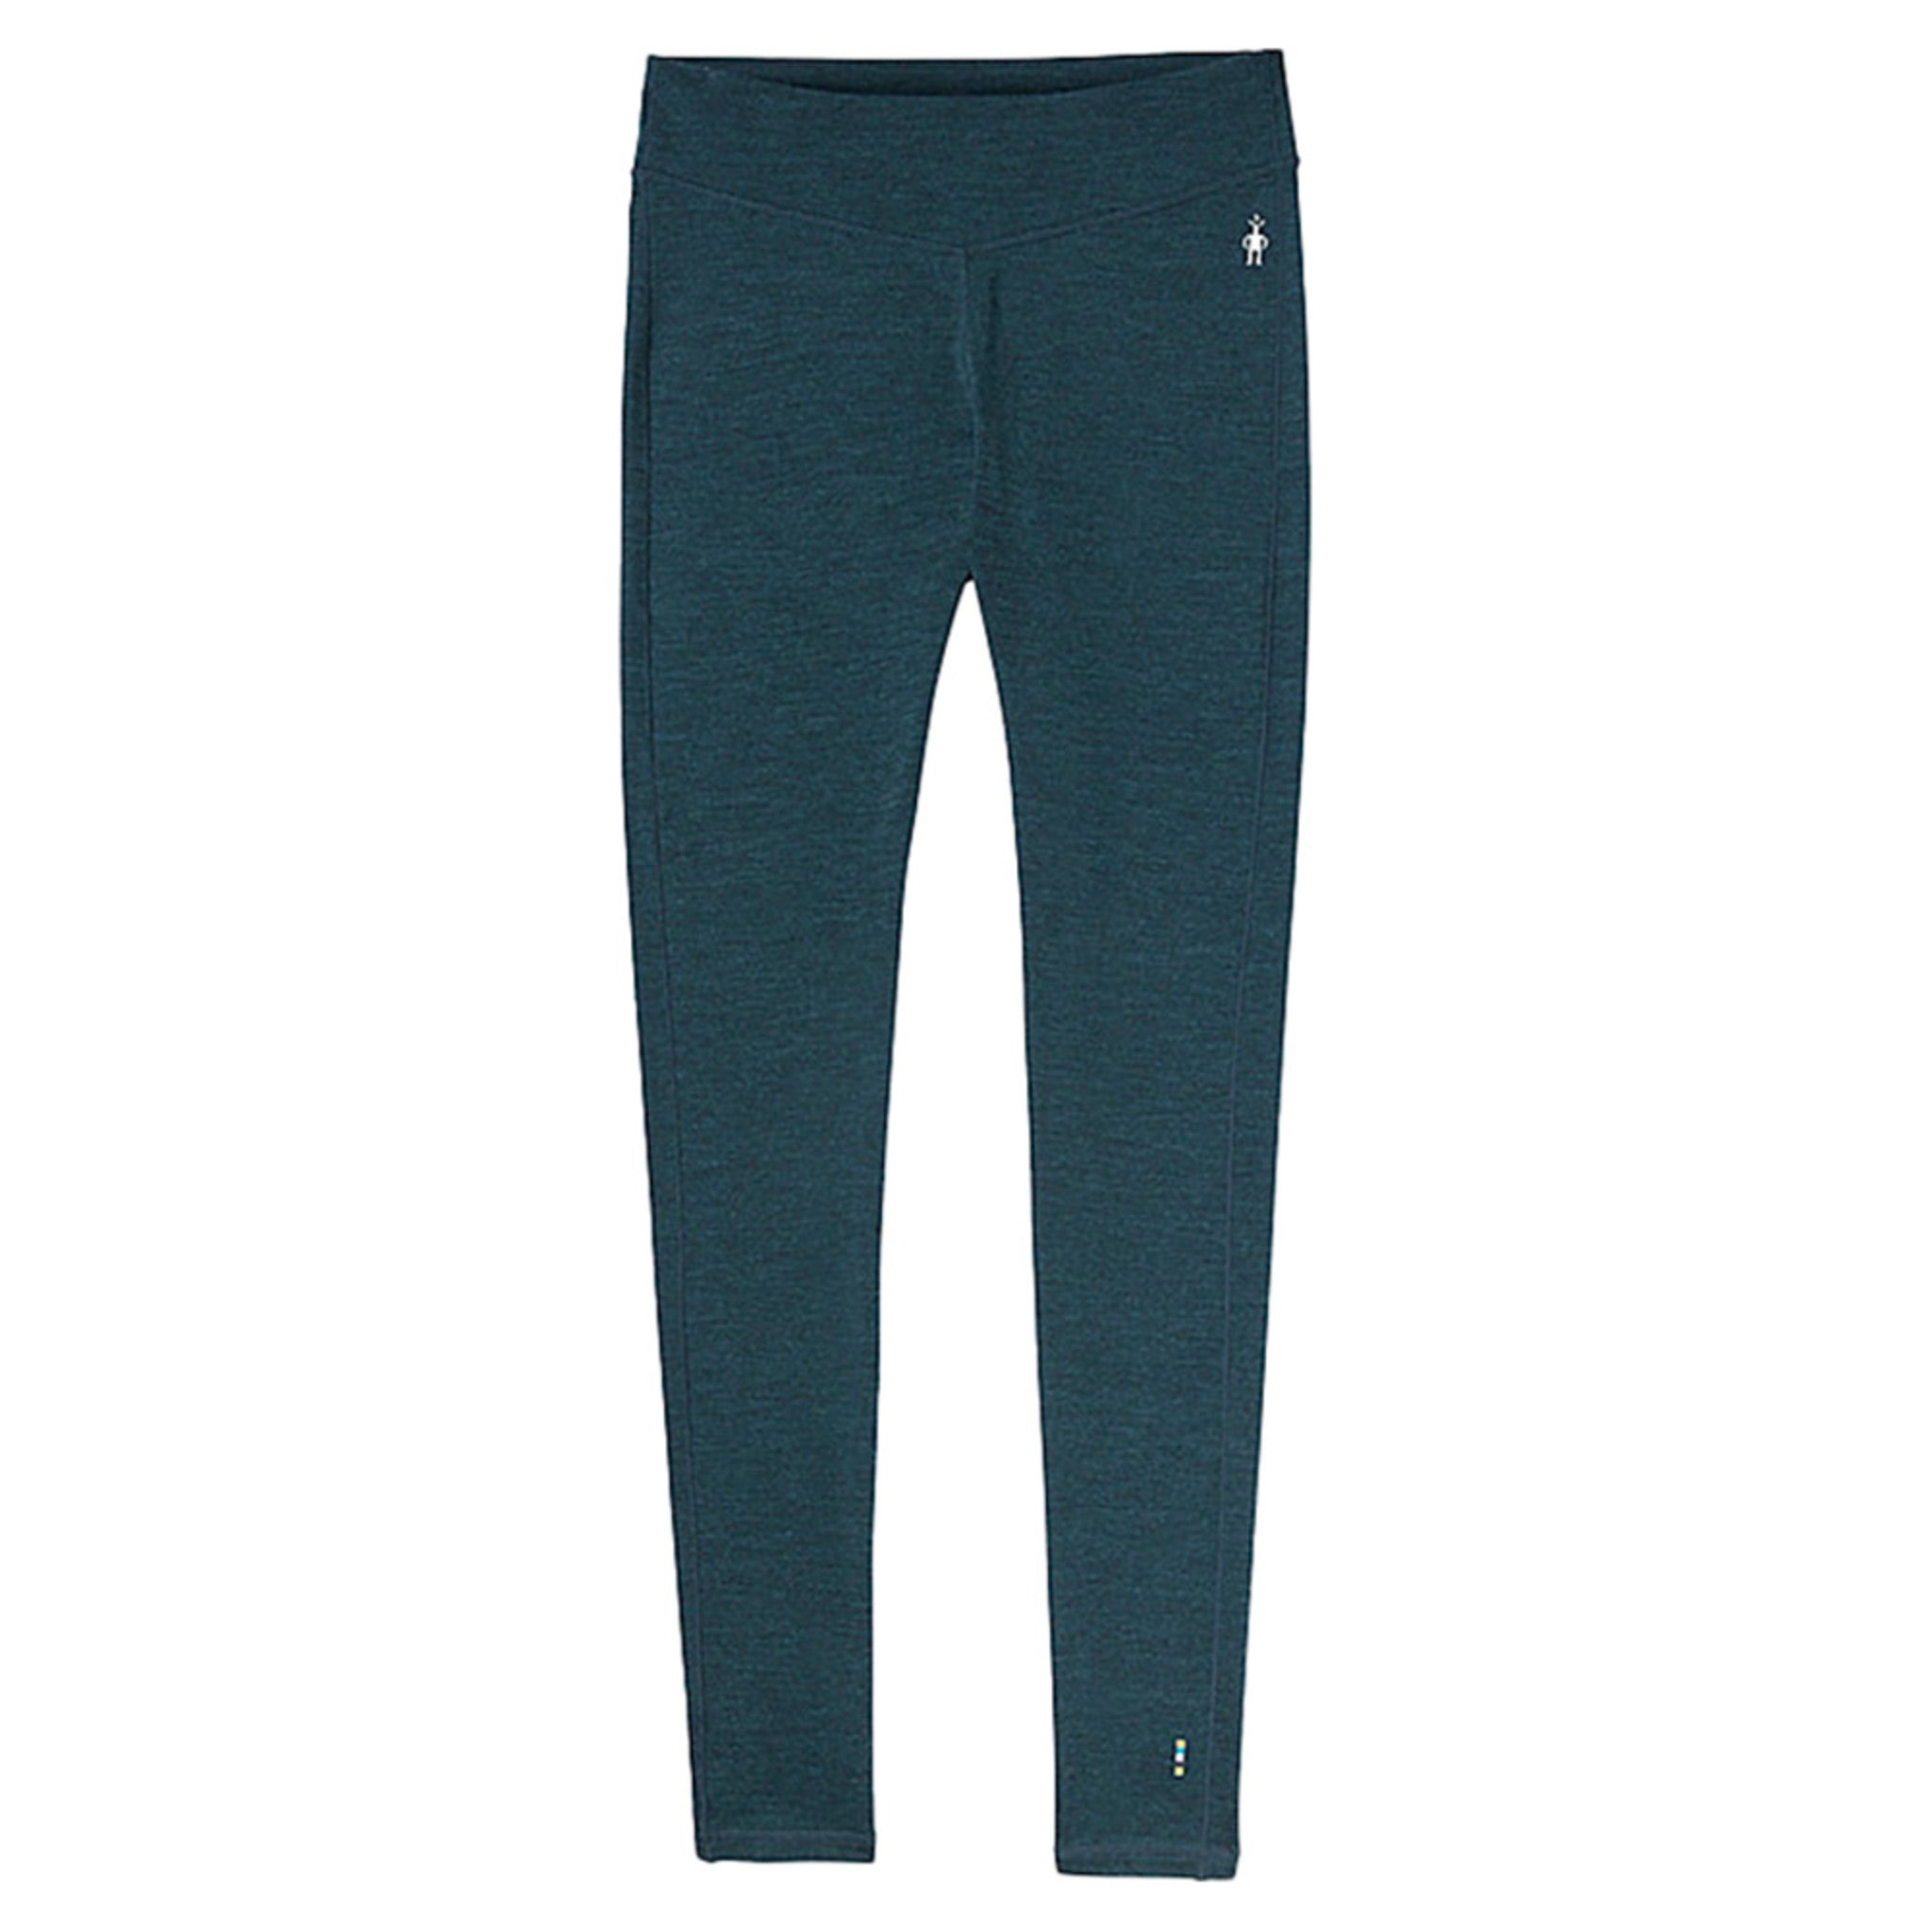 Women's Base Layer & Insulated Bottoms